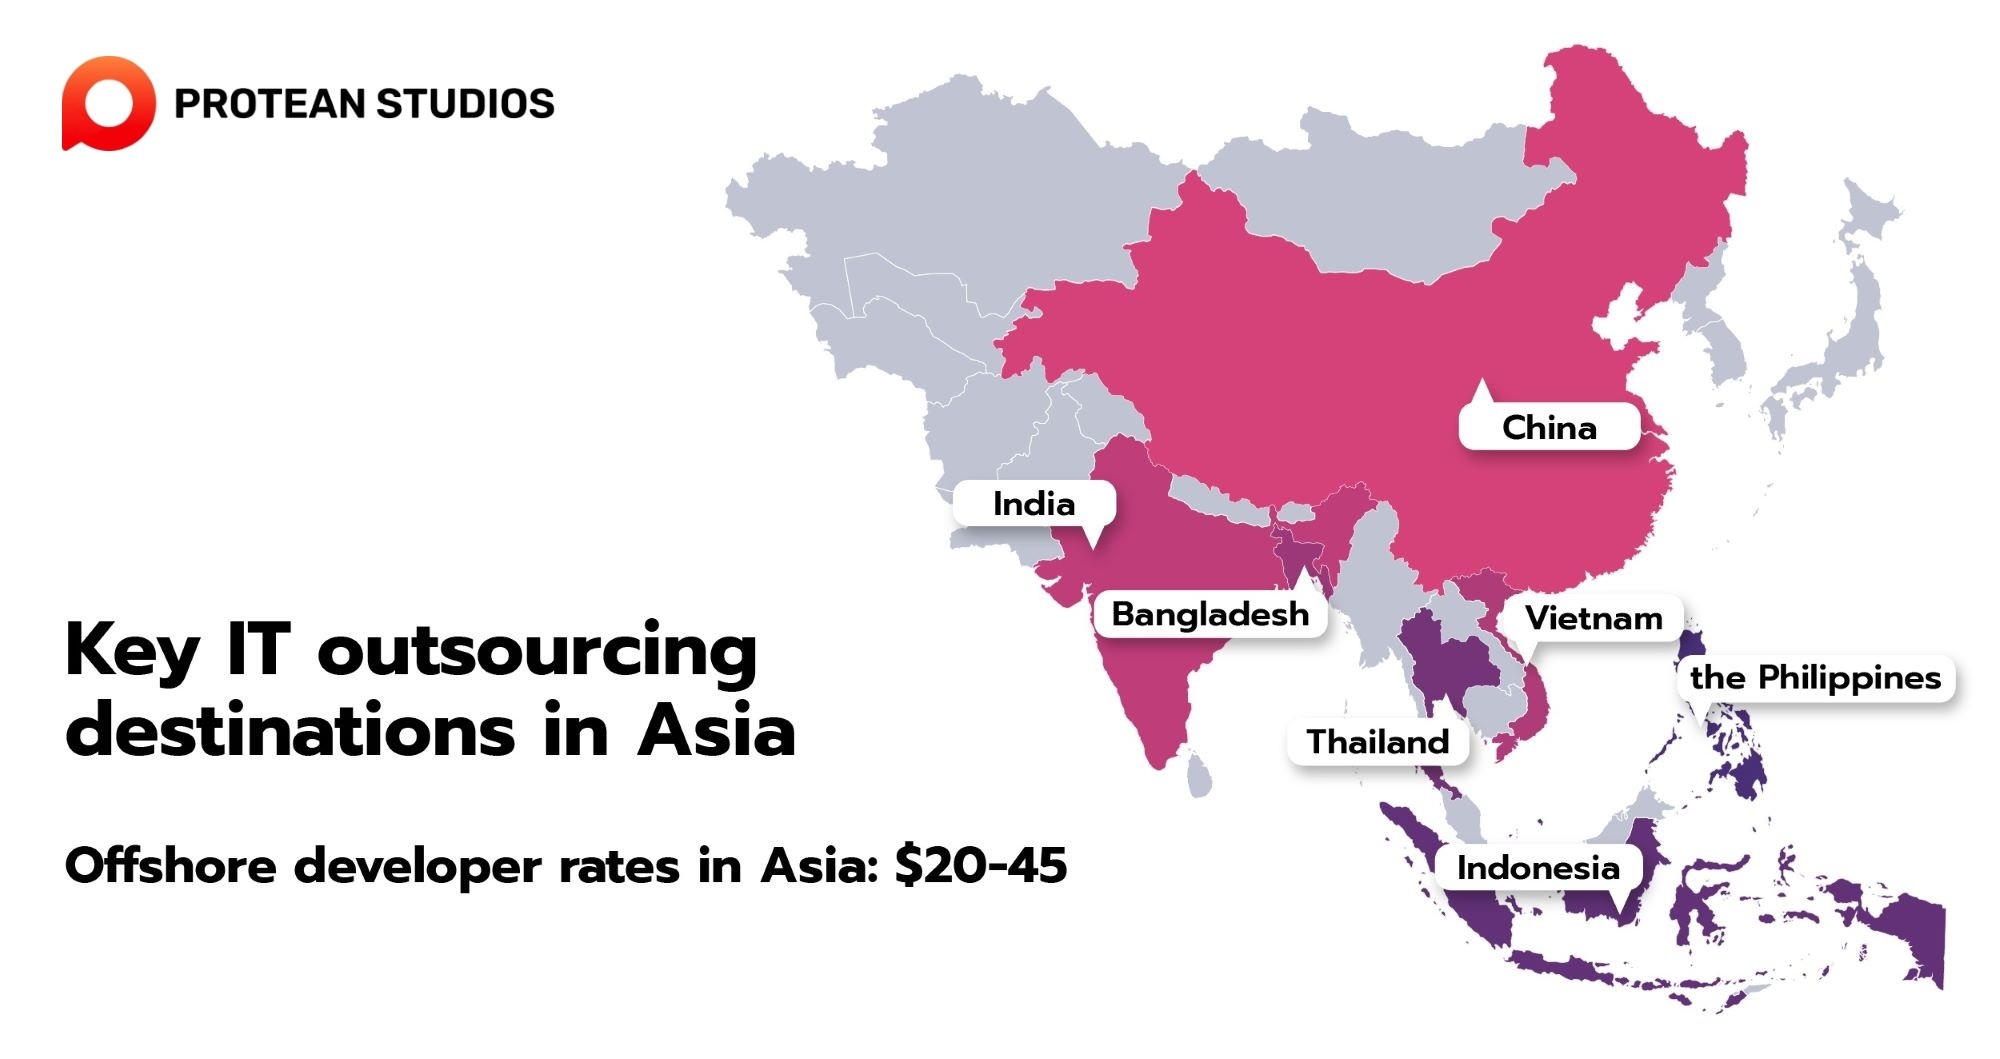 India, the hot IT outsourcing destination in the Asia-Pacific region